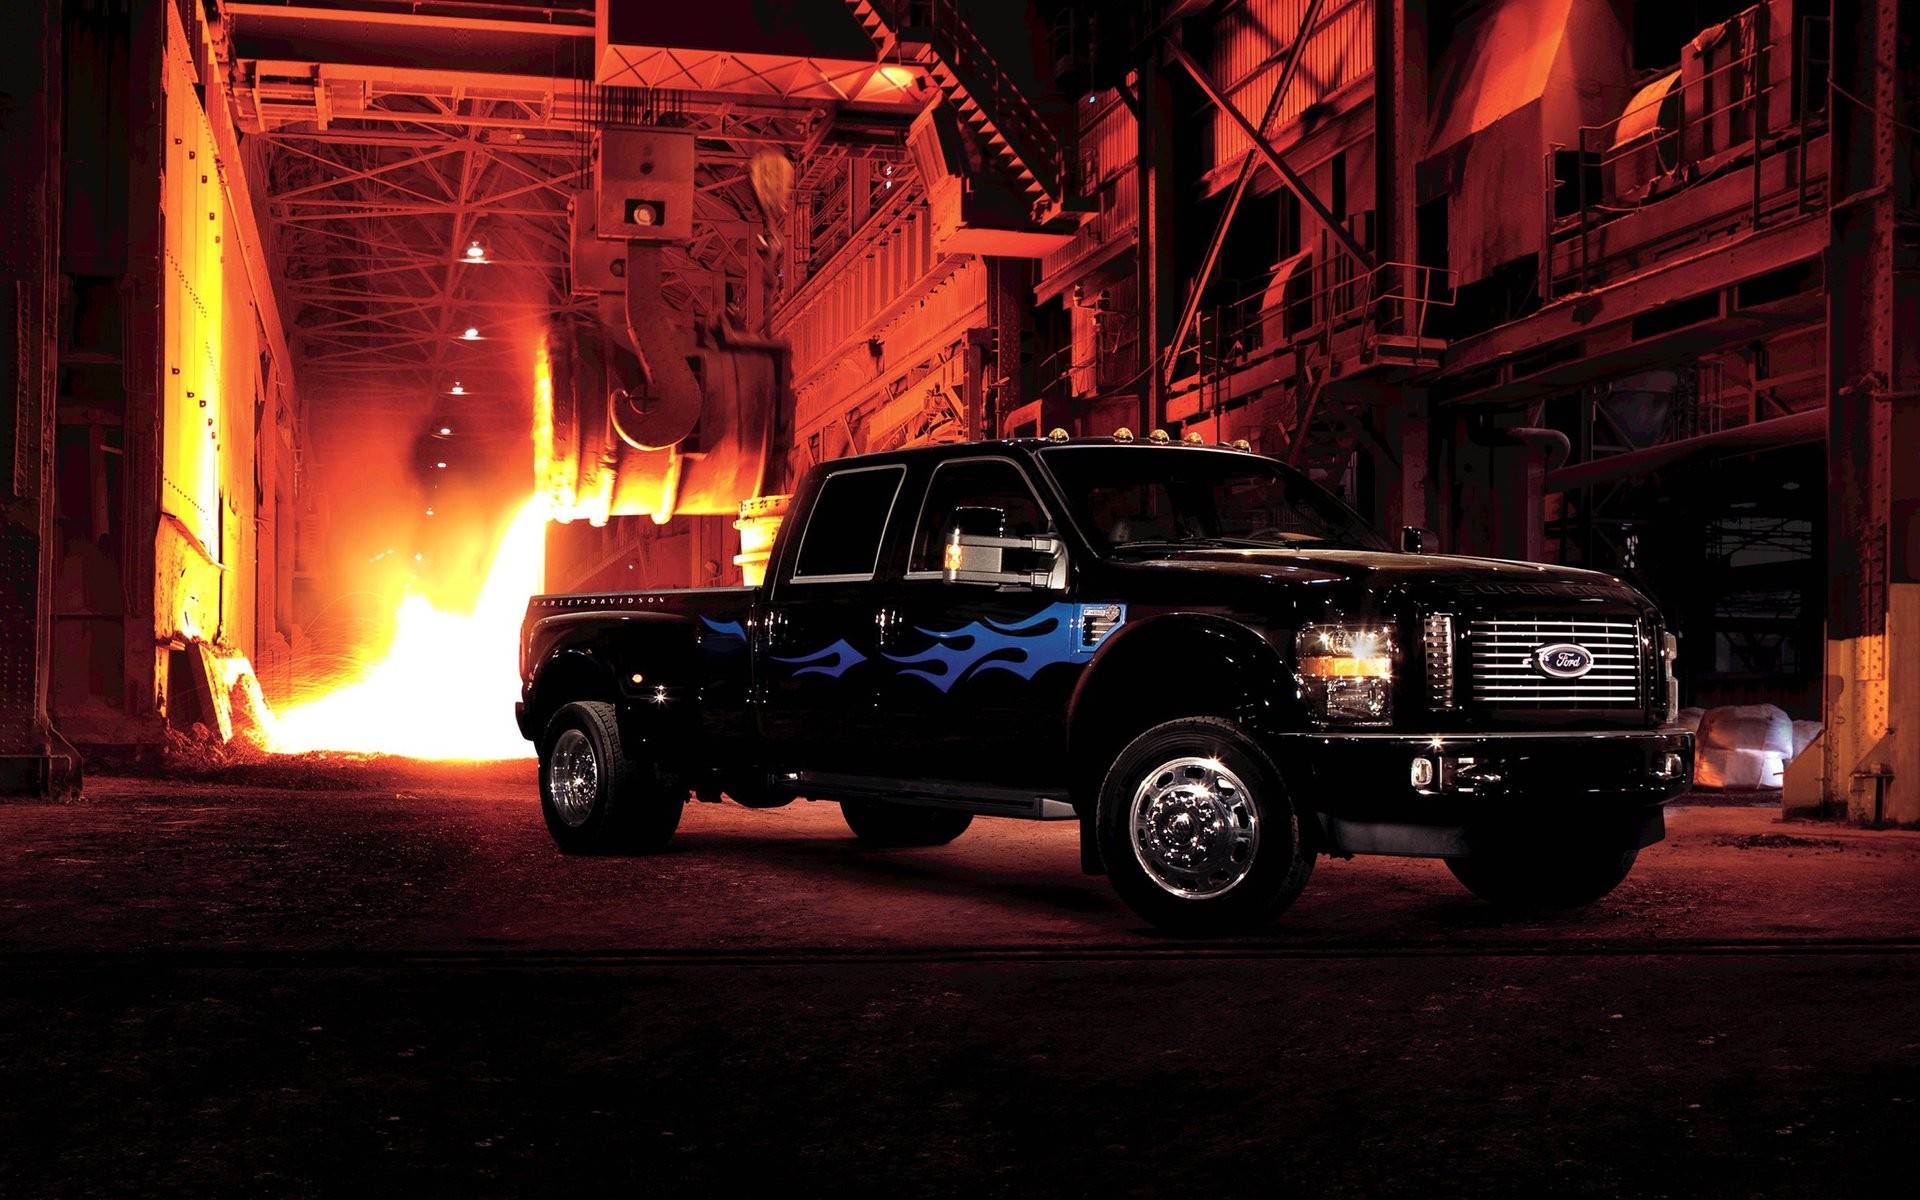 Ford Trucks Wallpapers.